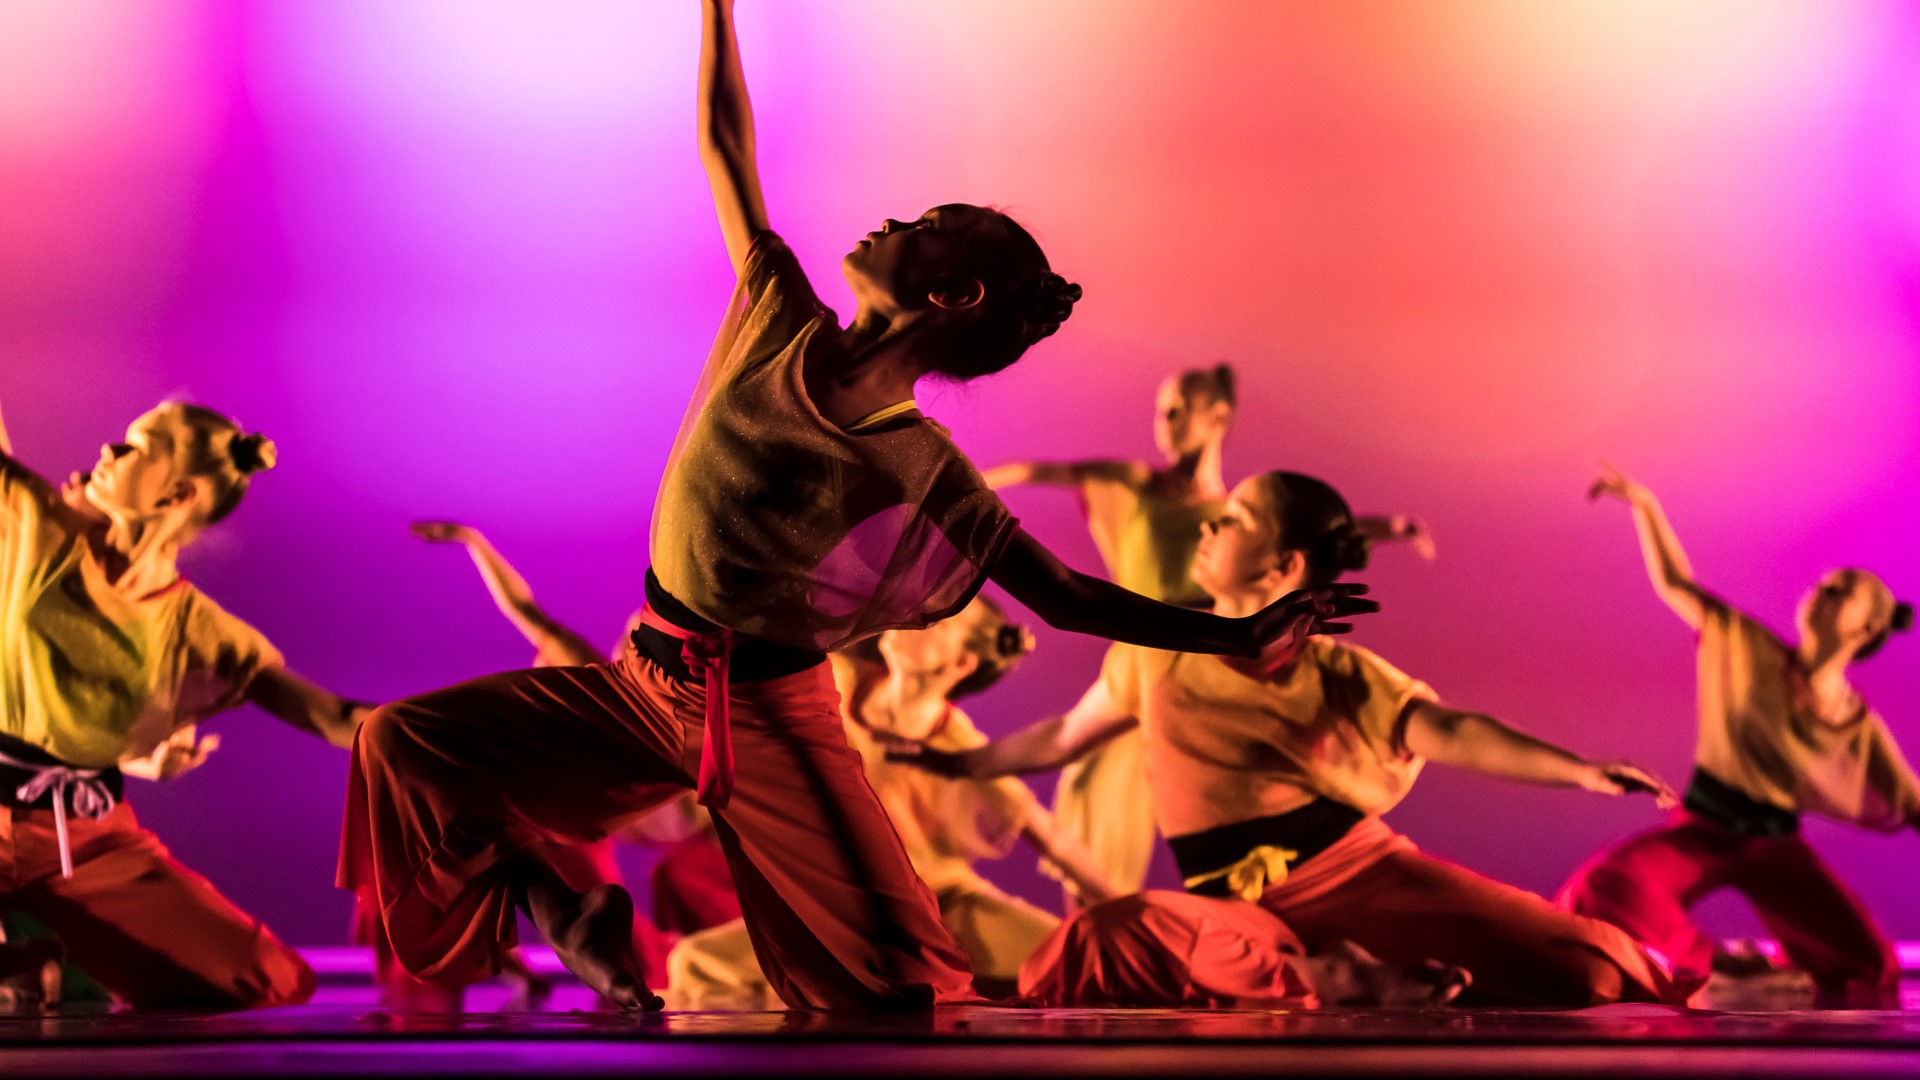 Students of the NSW Public Schools Primary Ensemble 2 performing 'Hana' at the 2019 State Dance Festival